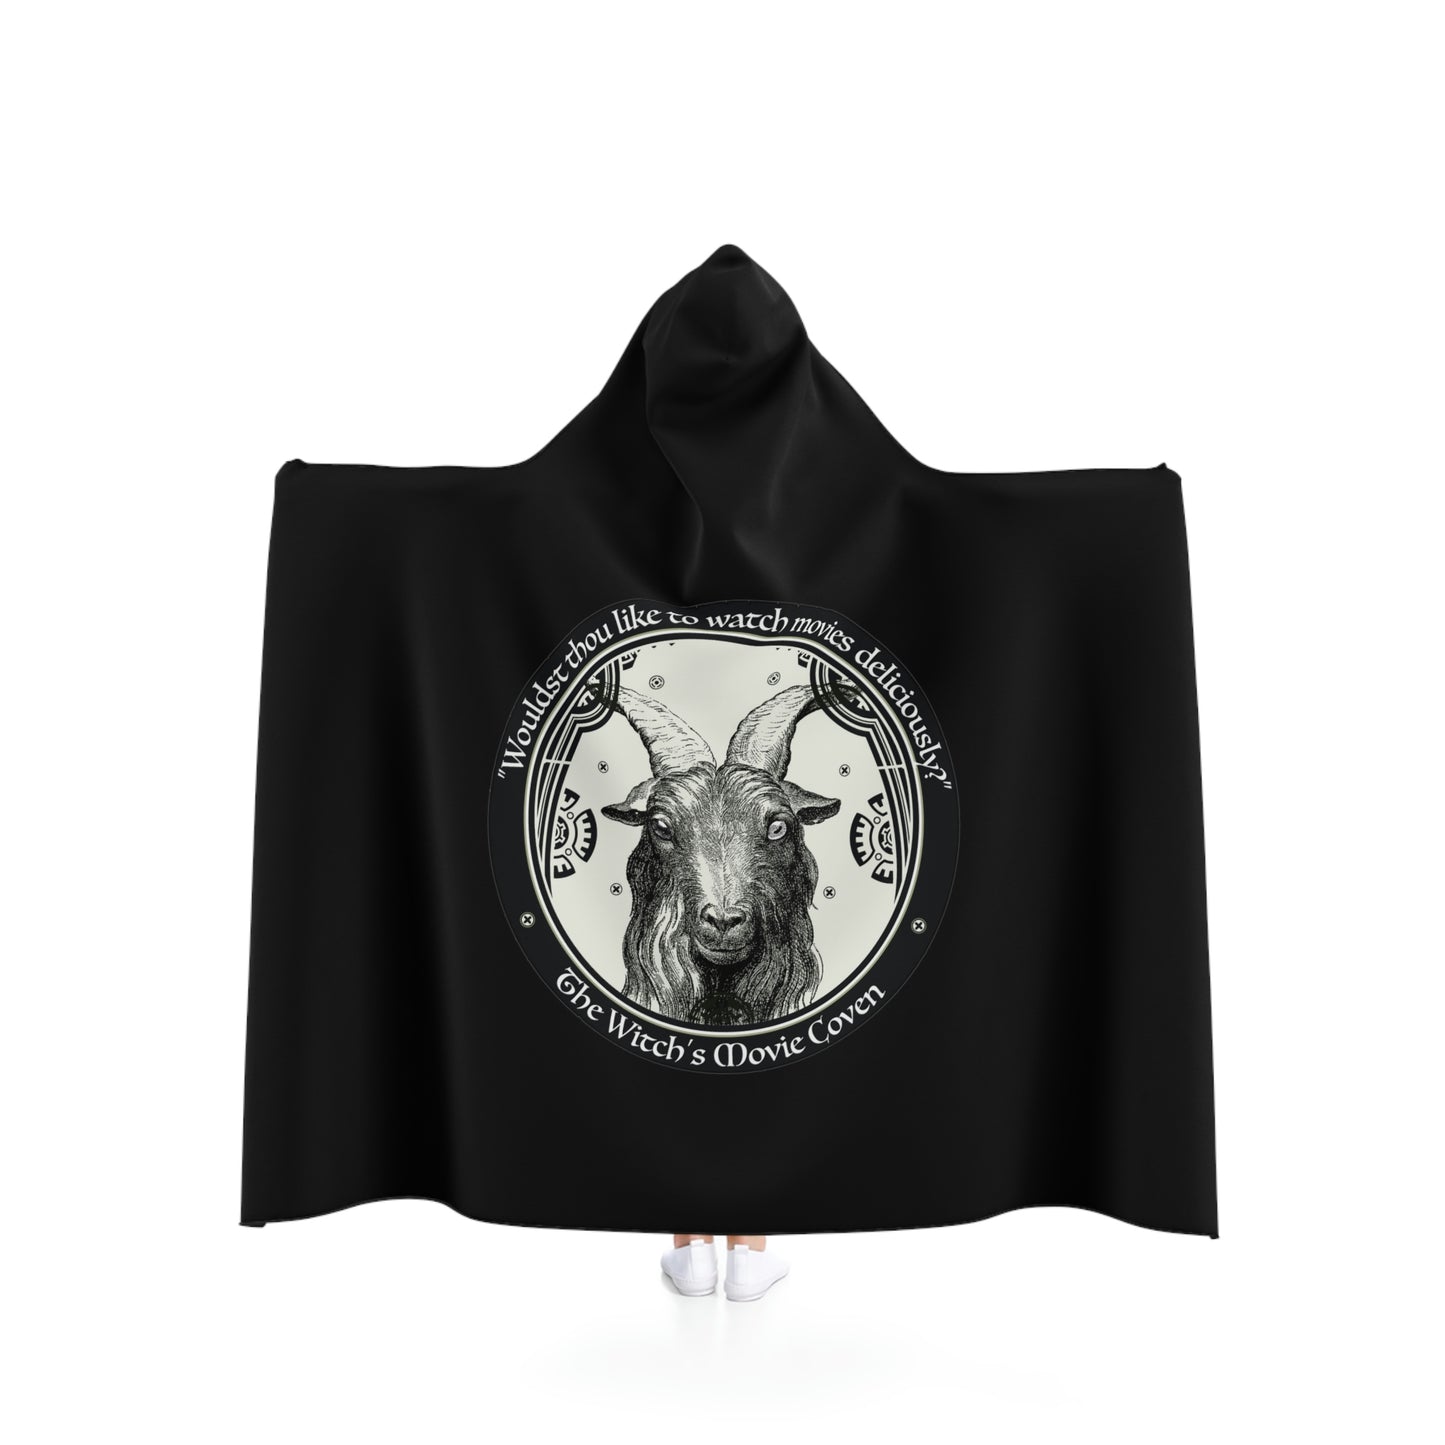 The Witch's Movie Coven Hooded Fleece Blanket